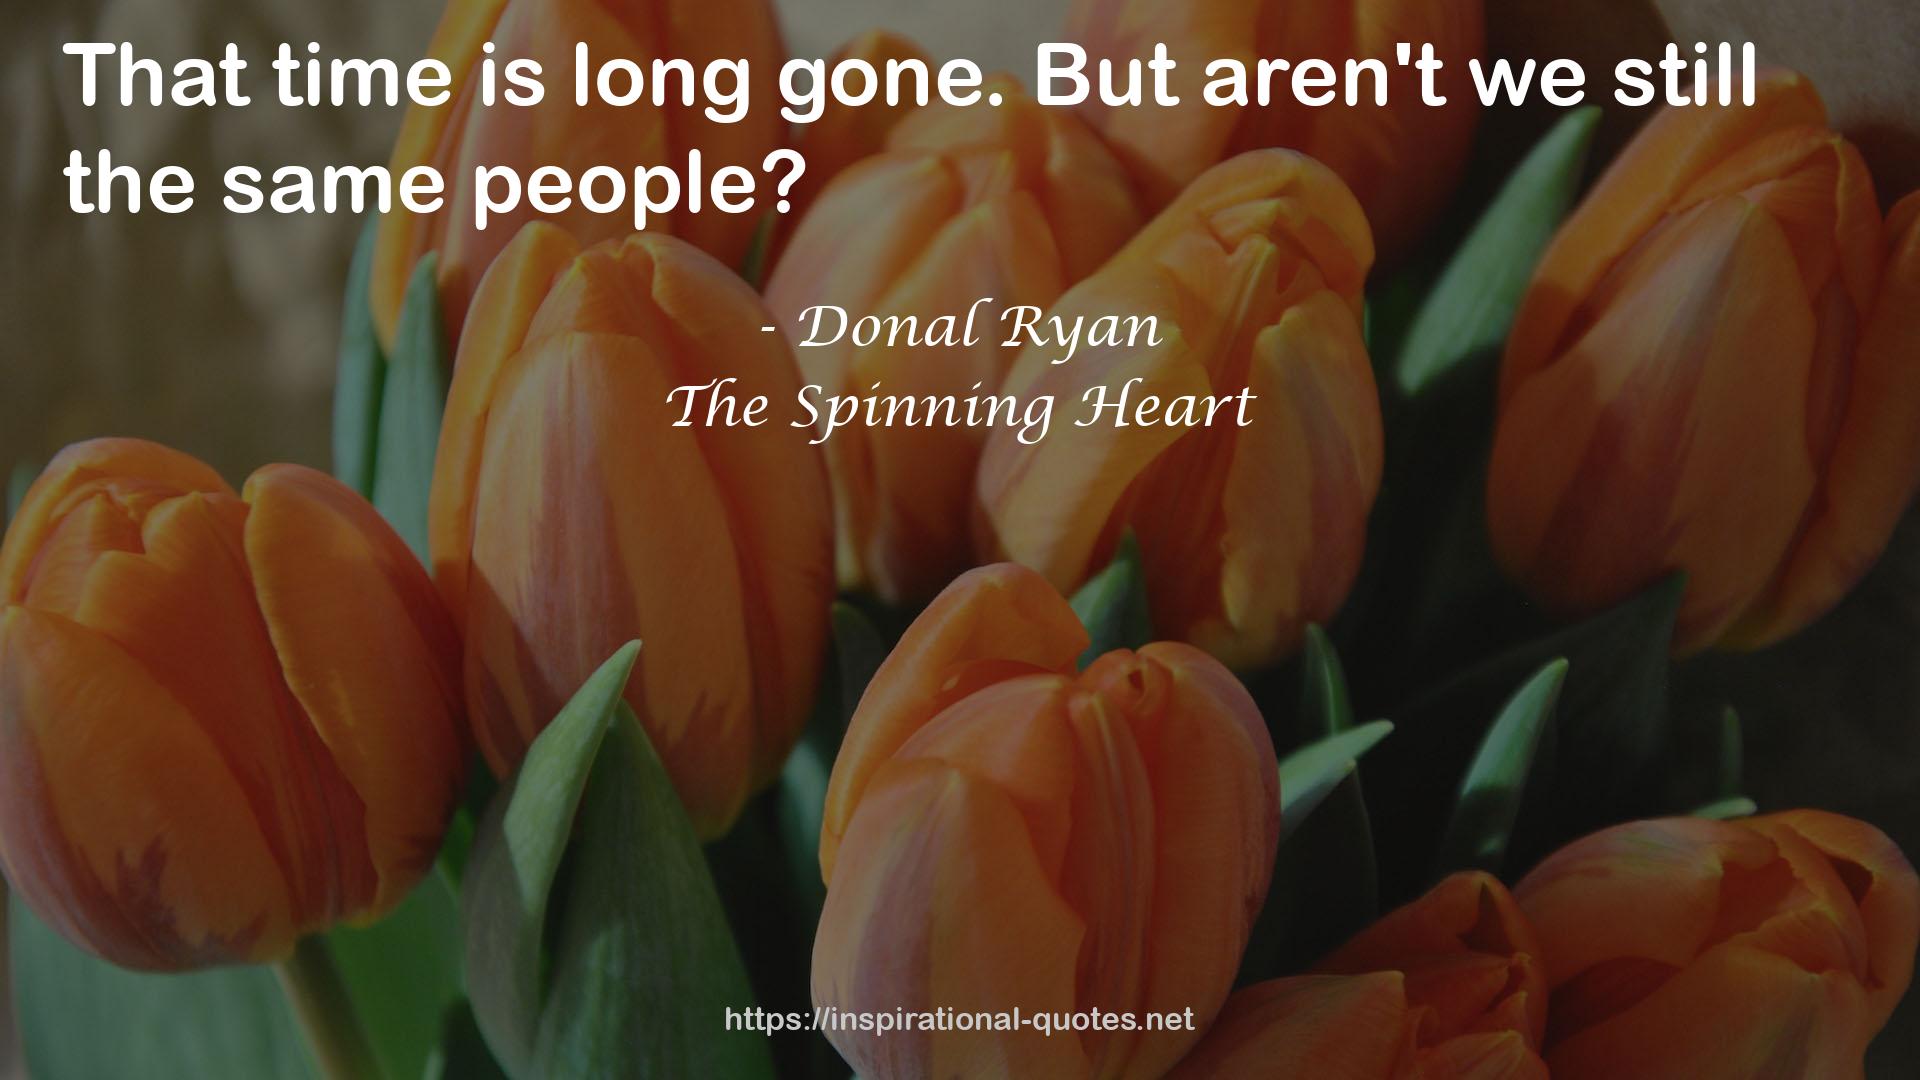 The Spinning Heart QUOTES